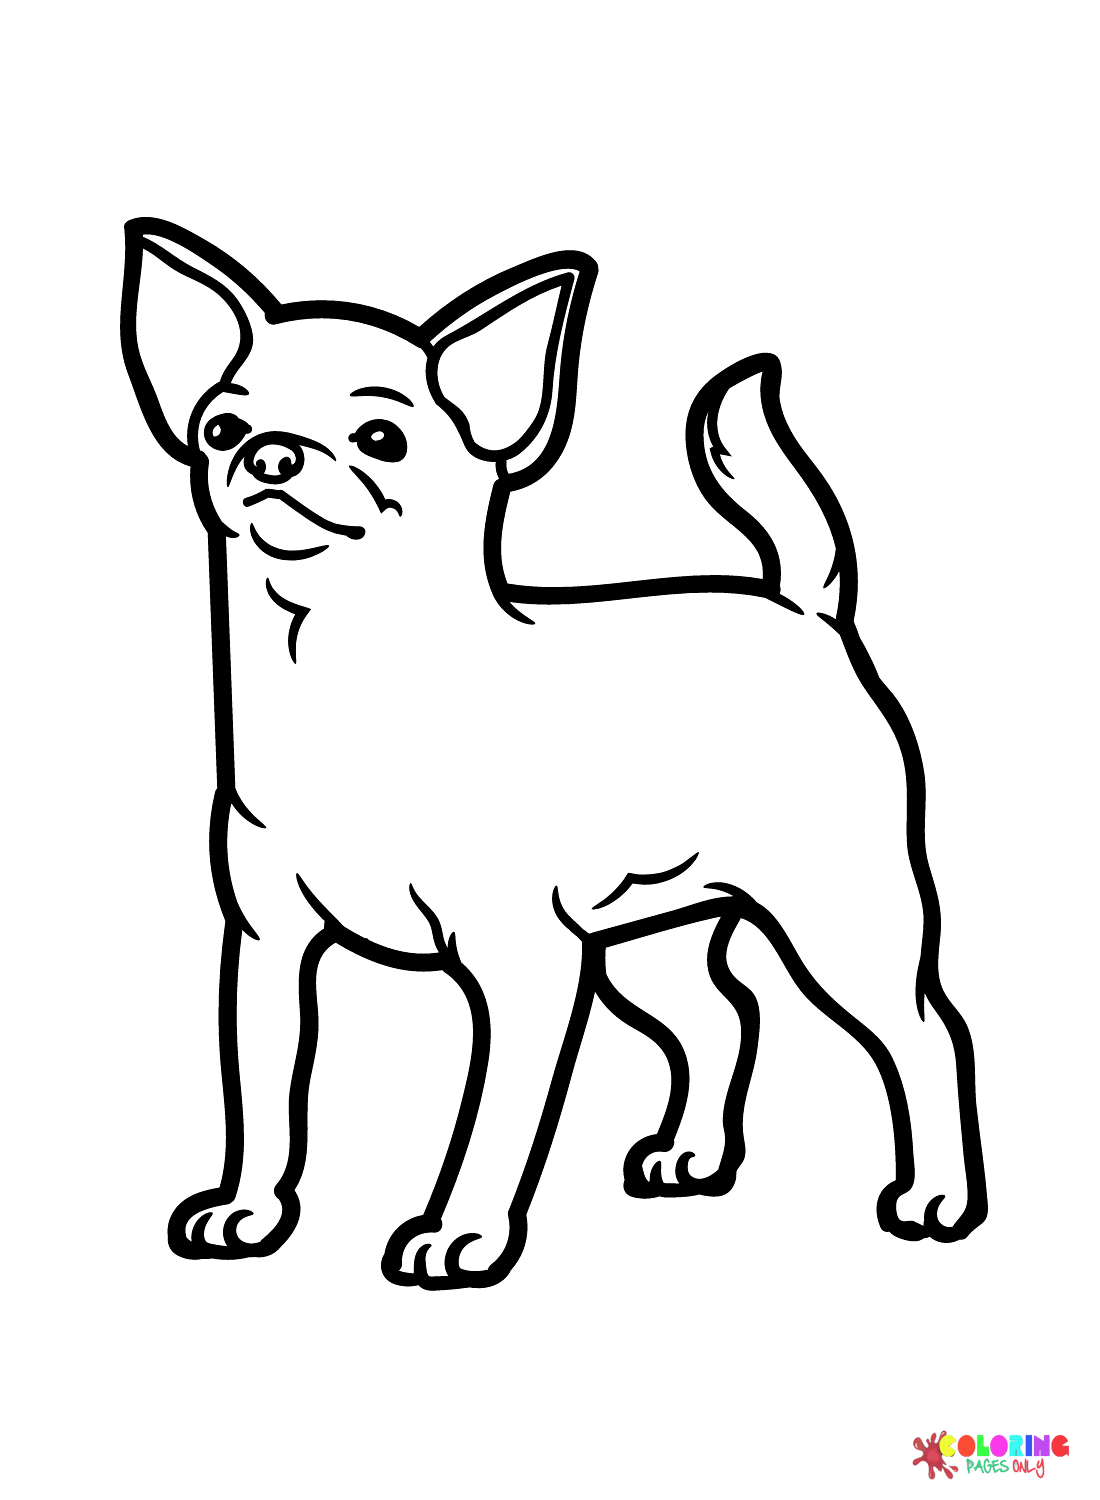 Chihuahua coloring pages printable for free download